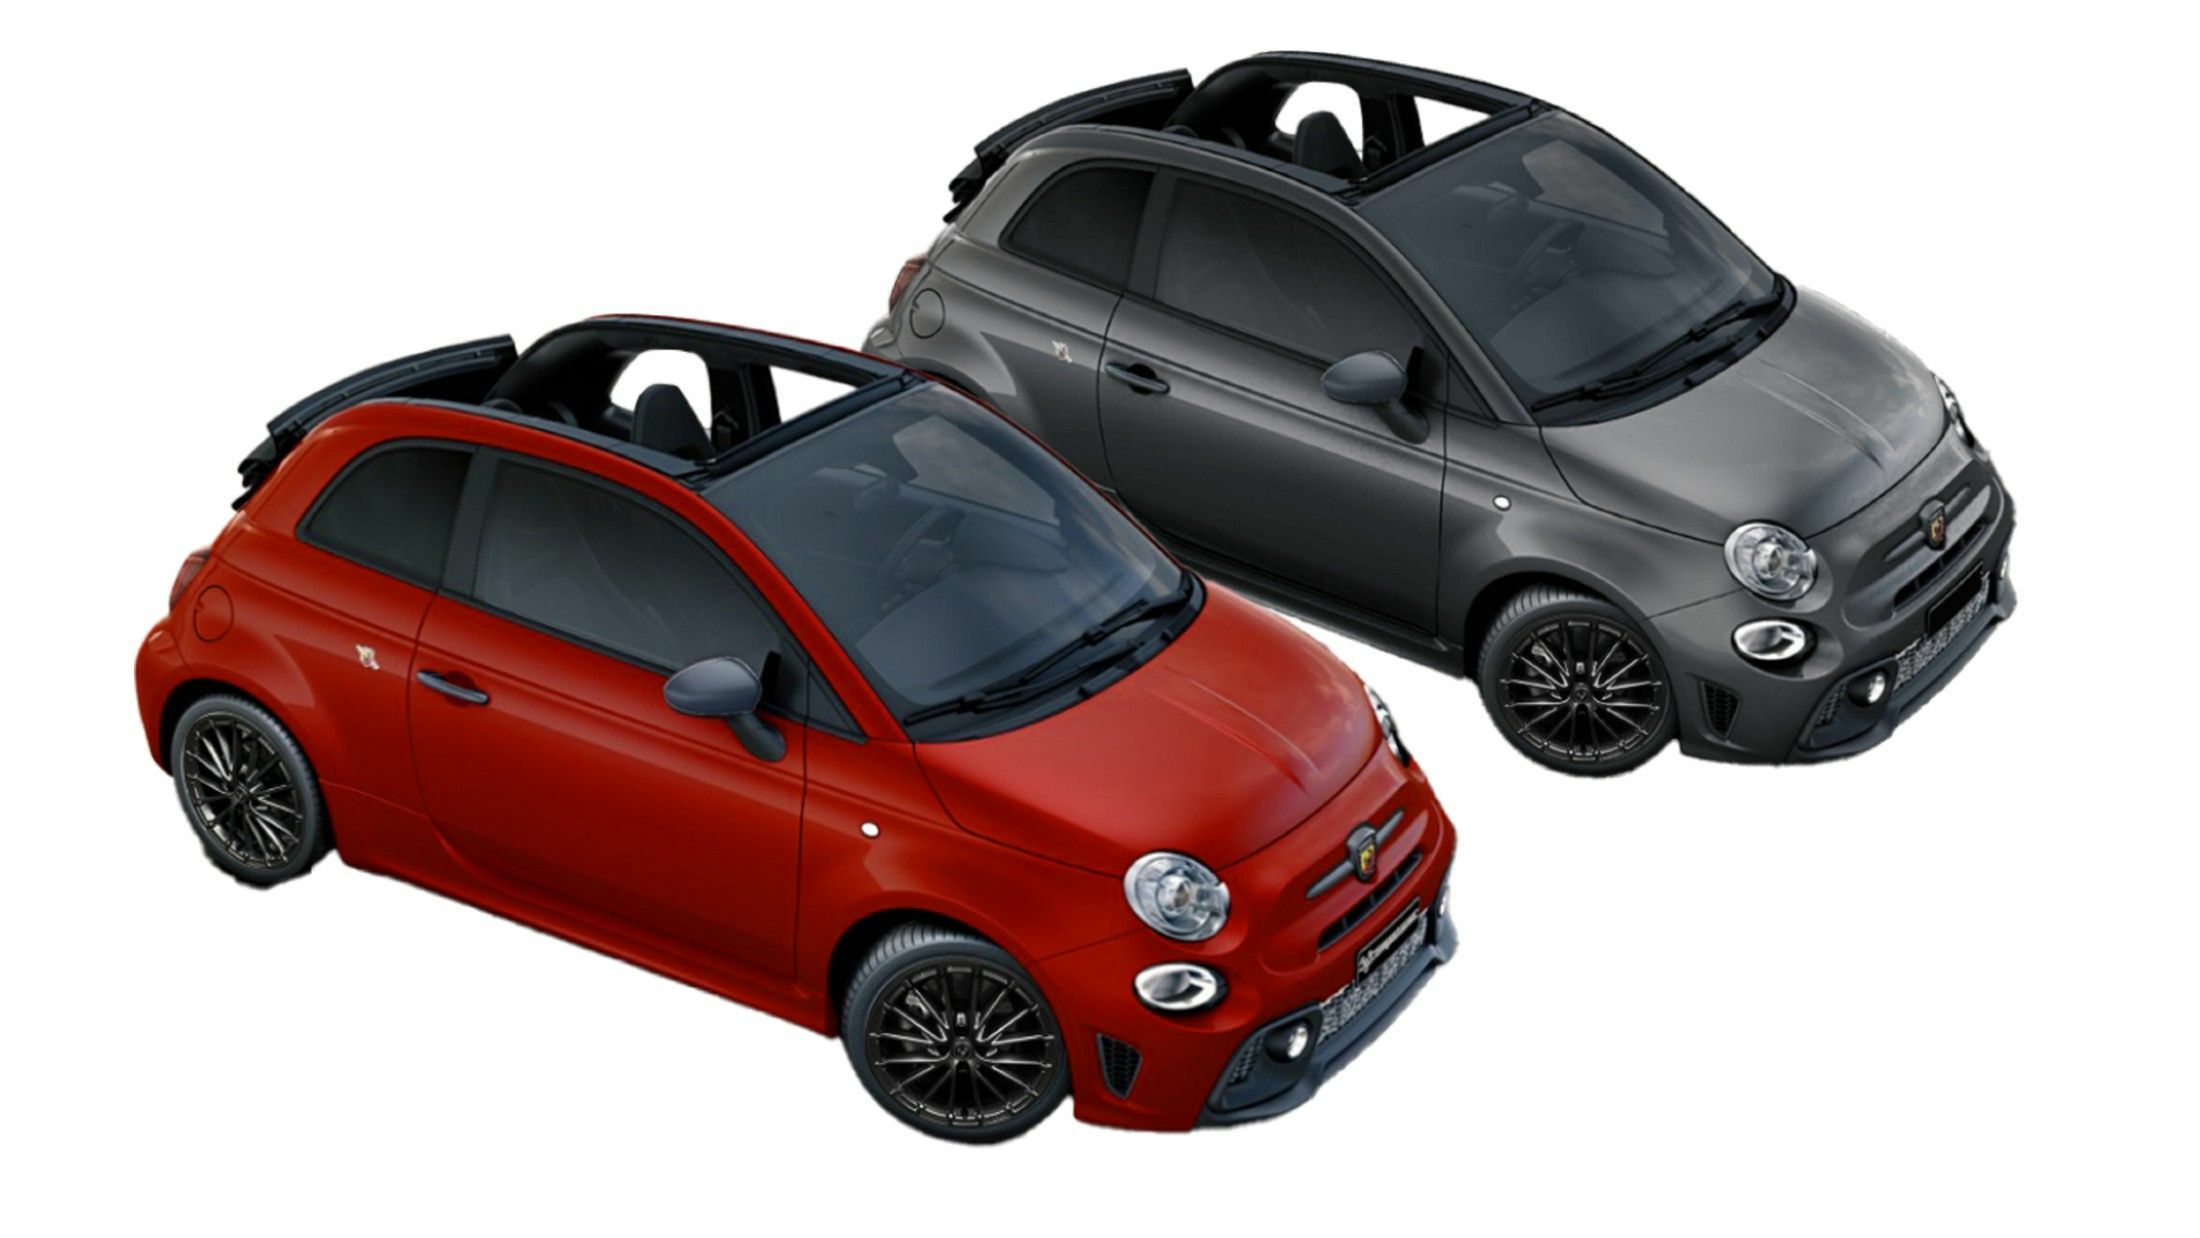 Abarth 595 Reminds Us It's Still Around With New Limited Edition For Japan